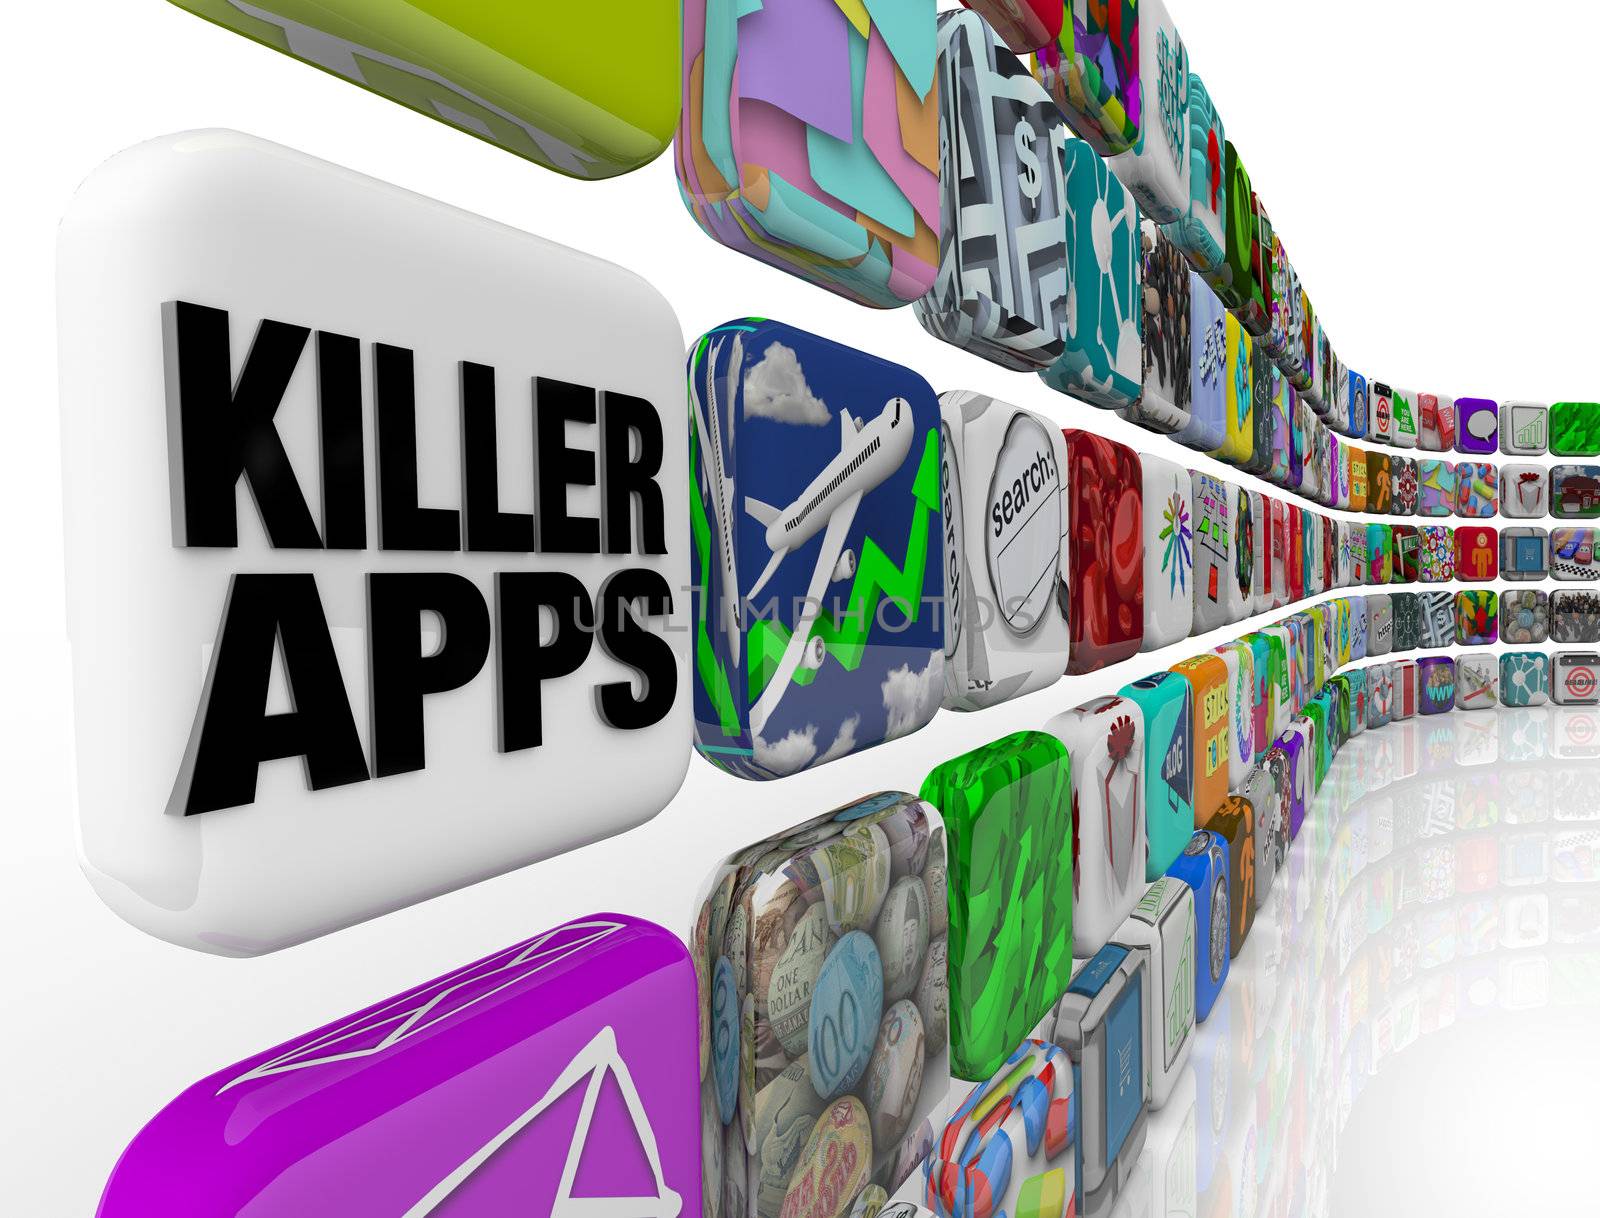 The words Killer Apps on an app tile in a wall of applications and software you can download into your smart phone, tablet computer or other mobile device